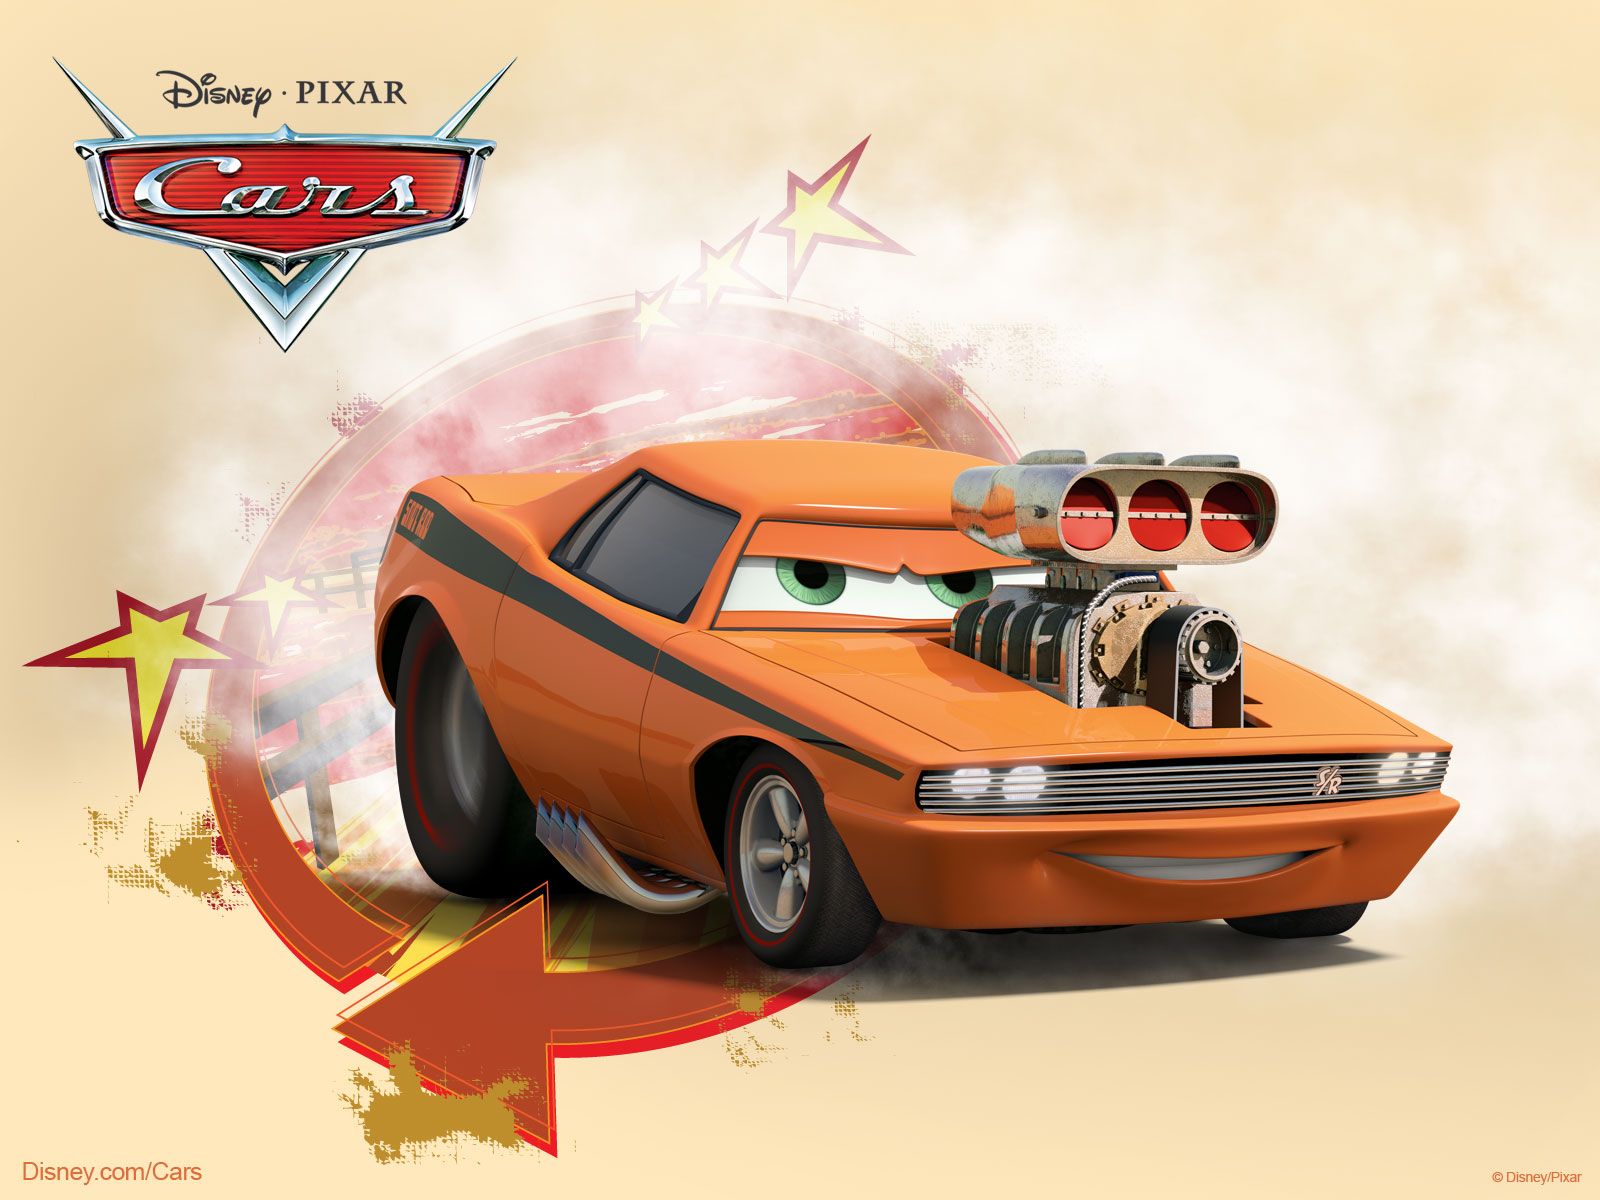 Snot Rod the Muscle Car from Pixar's Cars Movie Desktop Wallpaper